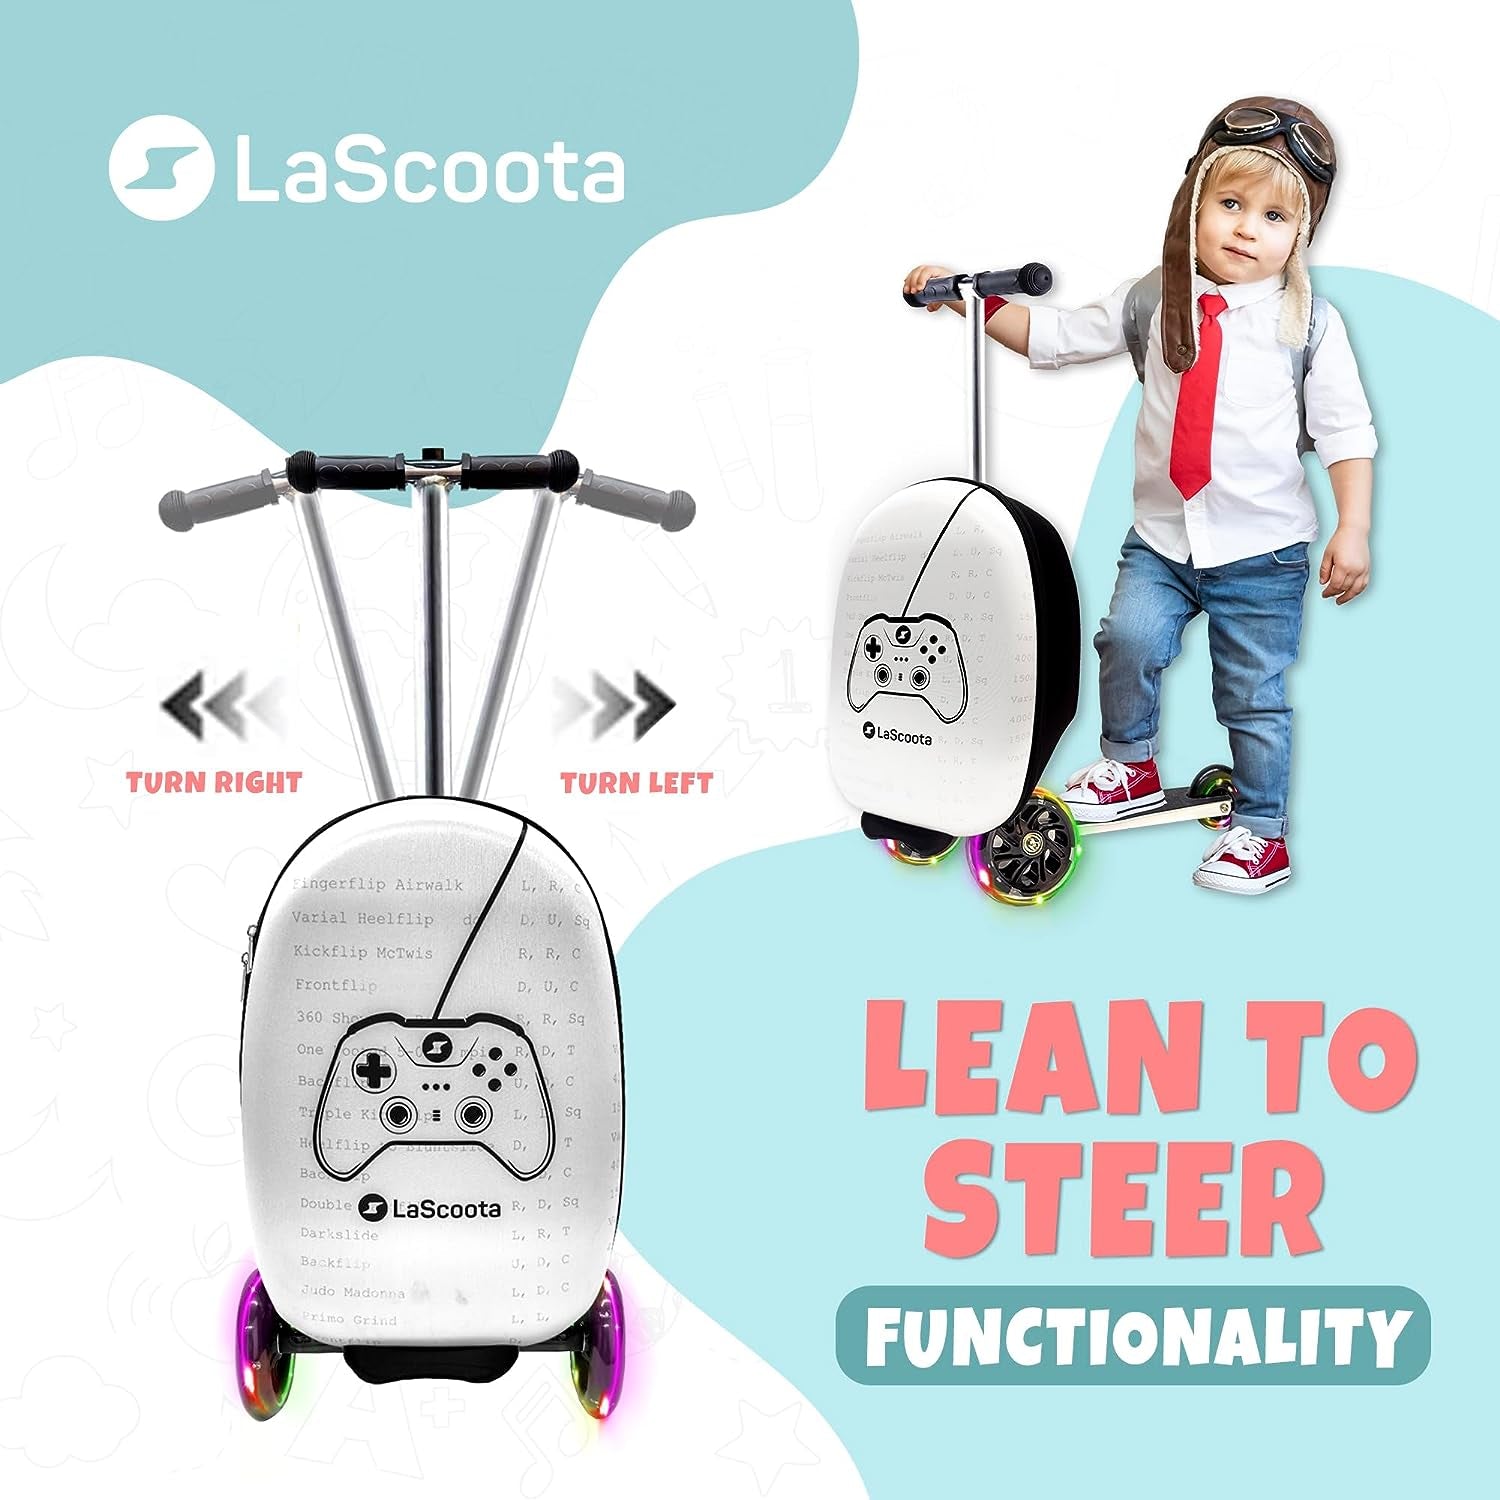 Scooter Suitcase, Foldable Scooter Luggage for Kids - Lightweight Kids Ride on Luggage Scooter with Wheels, LED Lights - Videogame Graphic Suitcase Scooter, Ride on Suitcase for Kids Ages 2-5